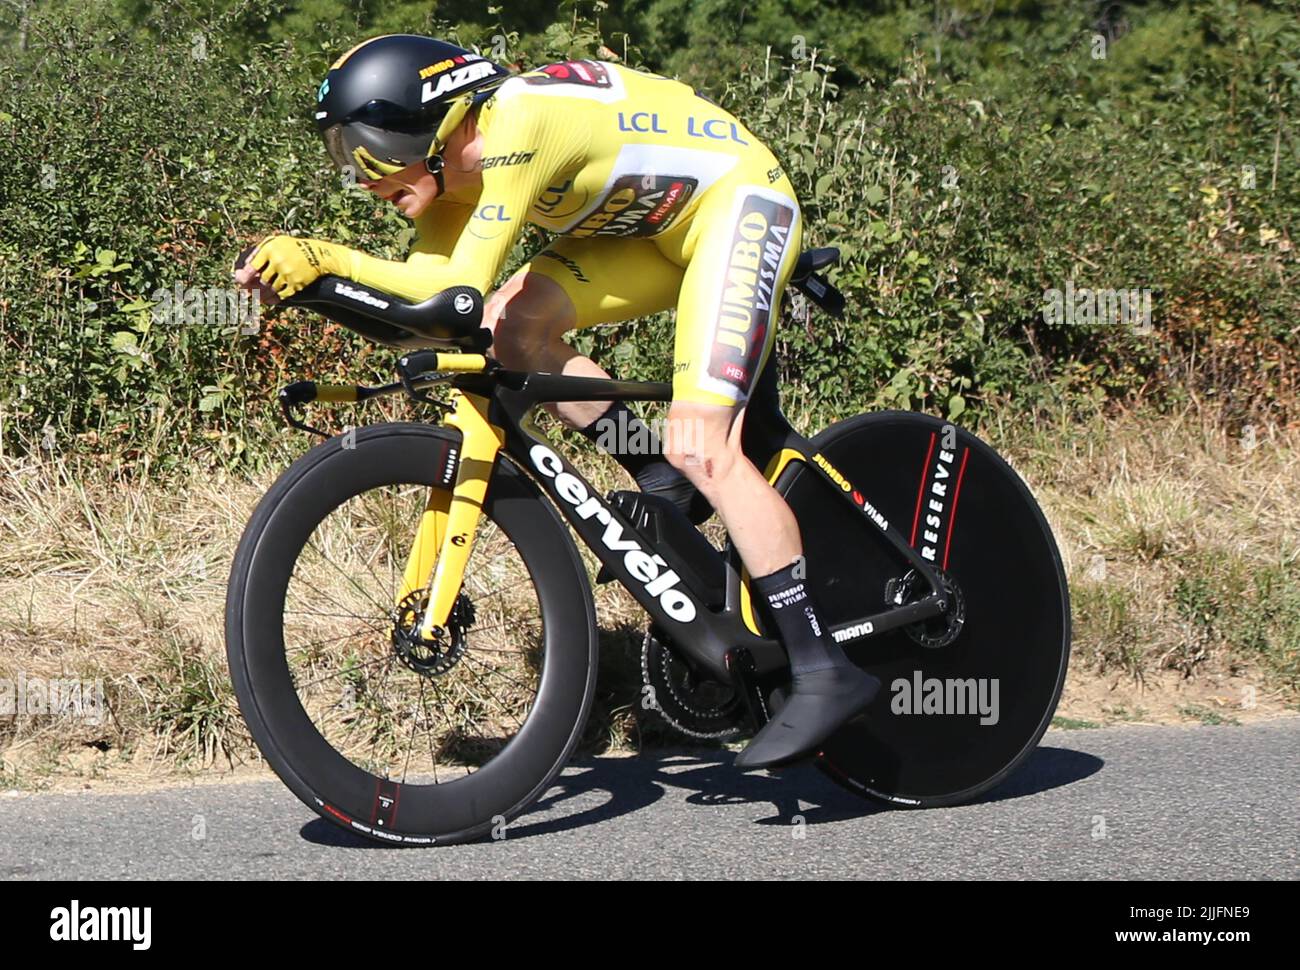 vingegaard-jonas-of-jumbo-visma-during-the-tour-de-france-2022-cycling-race-stage-20-time-trial-lacapelle-marival-rocamadour-407-km-on-july-23-2022-in-rocamadour-france-photo-laurent-lairys-dppi-2JJFNE9.jpg